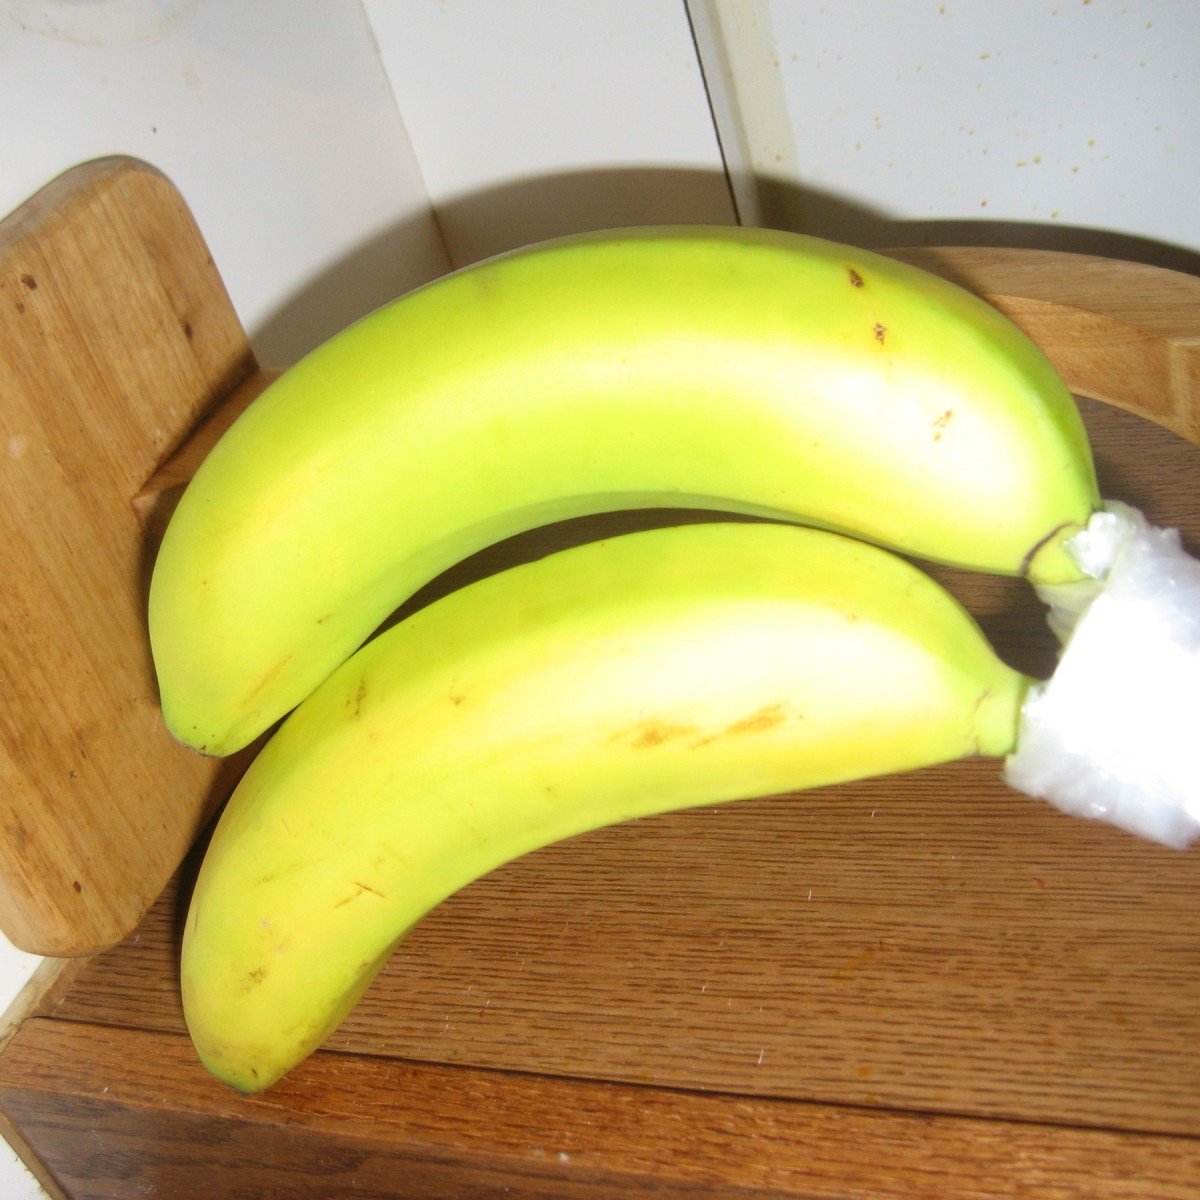 A tool to cut banana bunches from the stem : r/oddlysatisfying